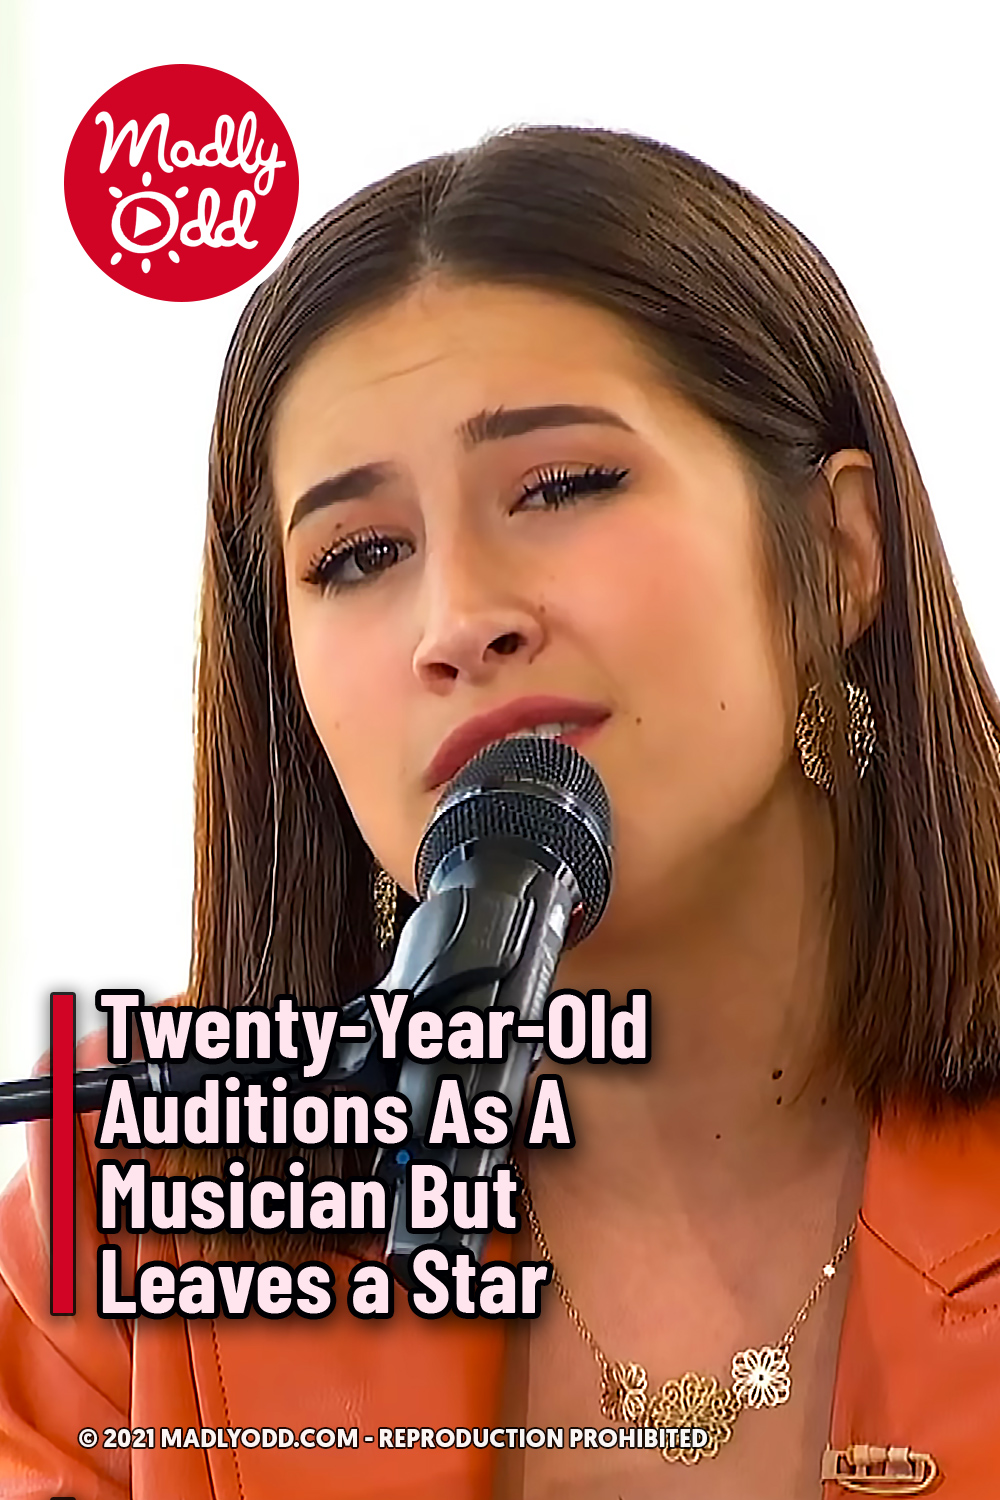 Twenty-Year-Old Auditions As A Musician But Leaves a Star